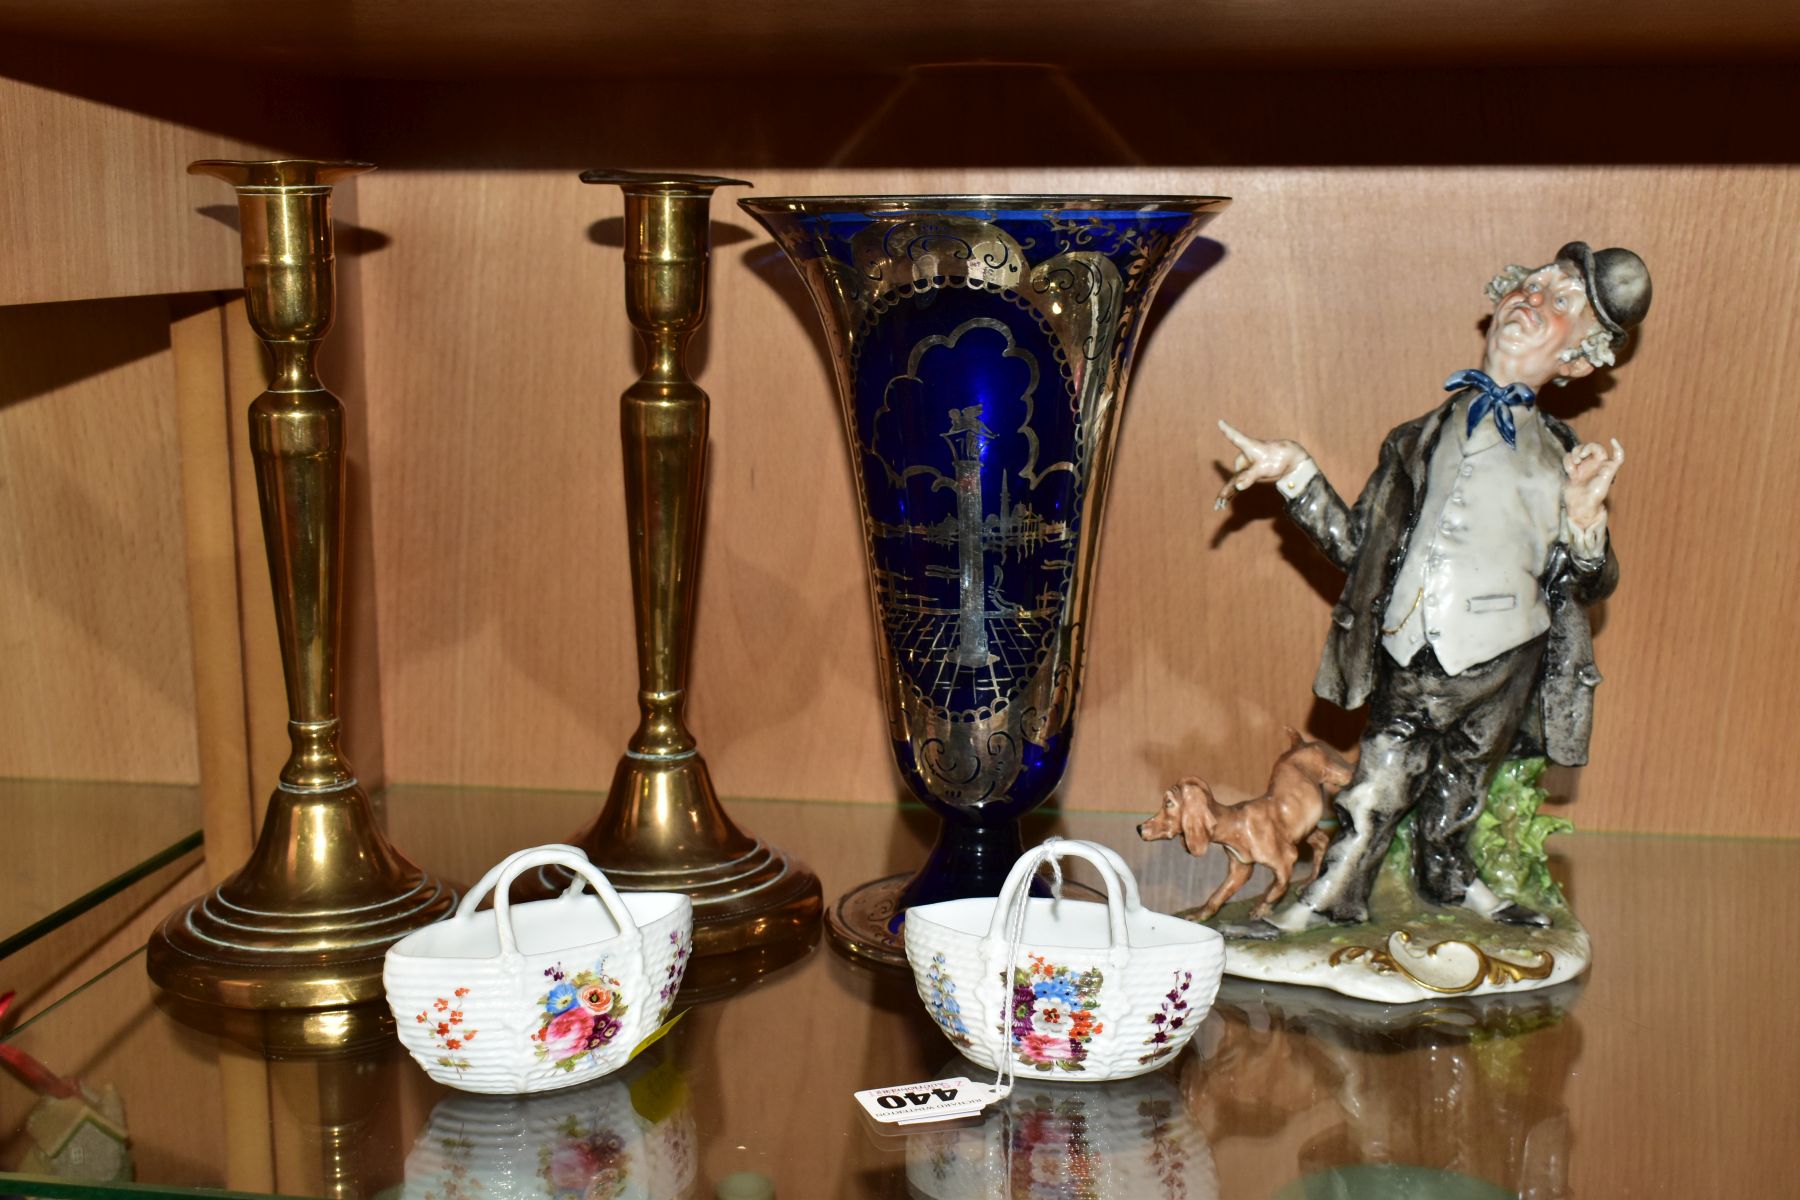 A SMALL GROUP OF CERAMICS, GLASS AND A PAIR OF LATE GEORGIAN BRASS CANDLESTICKS, comprising a pair